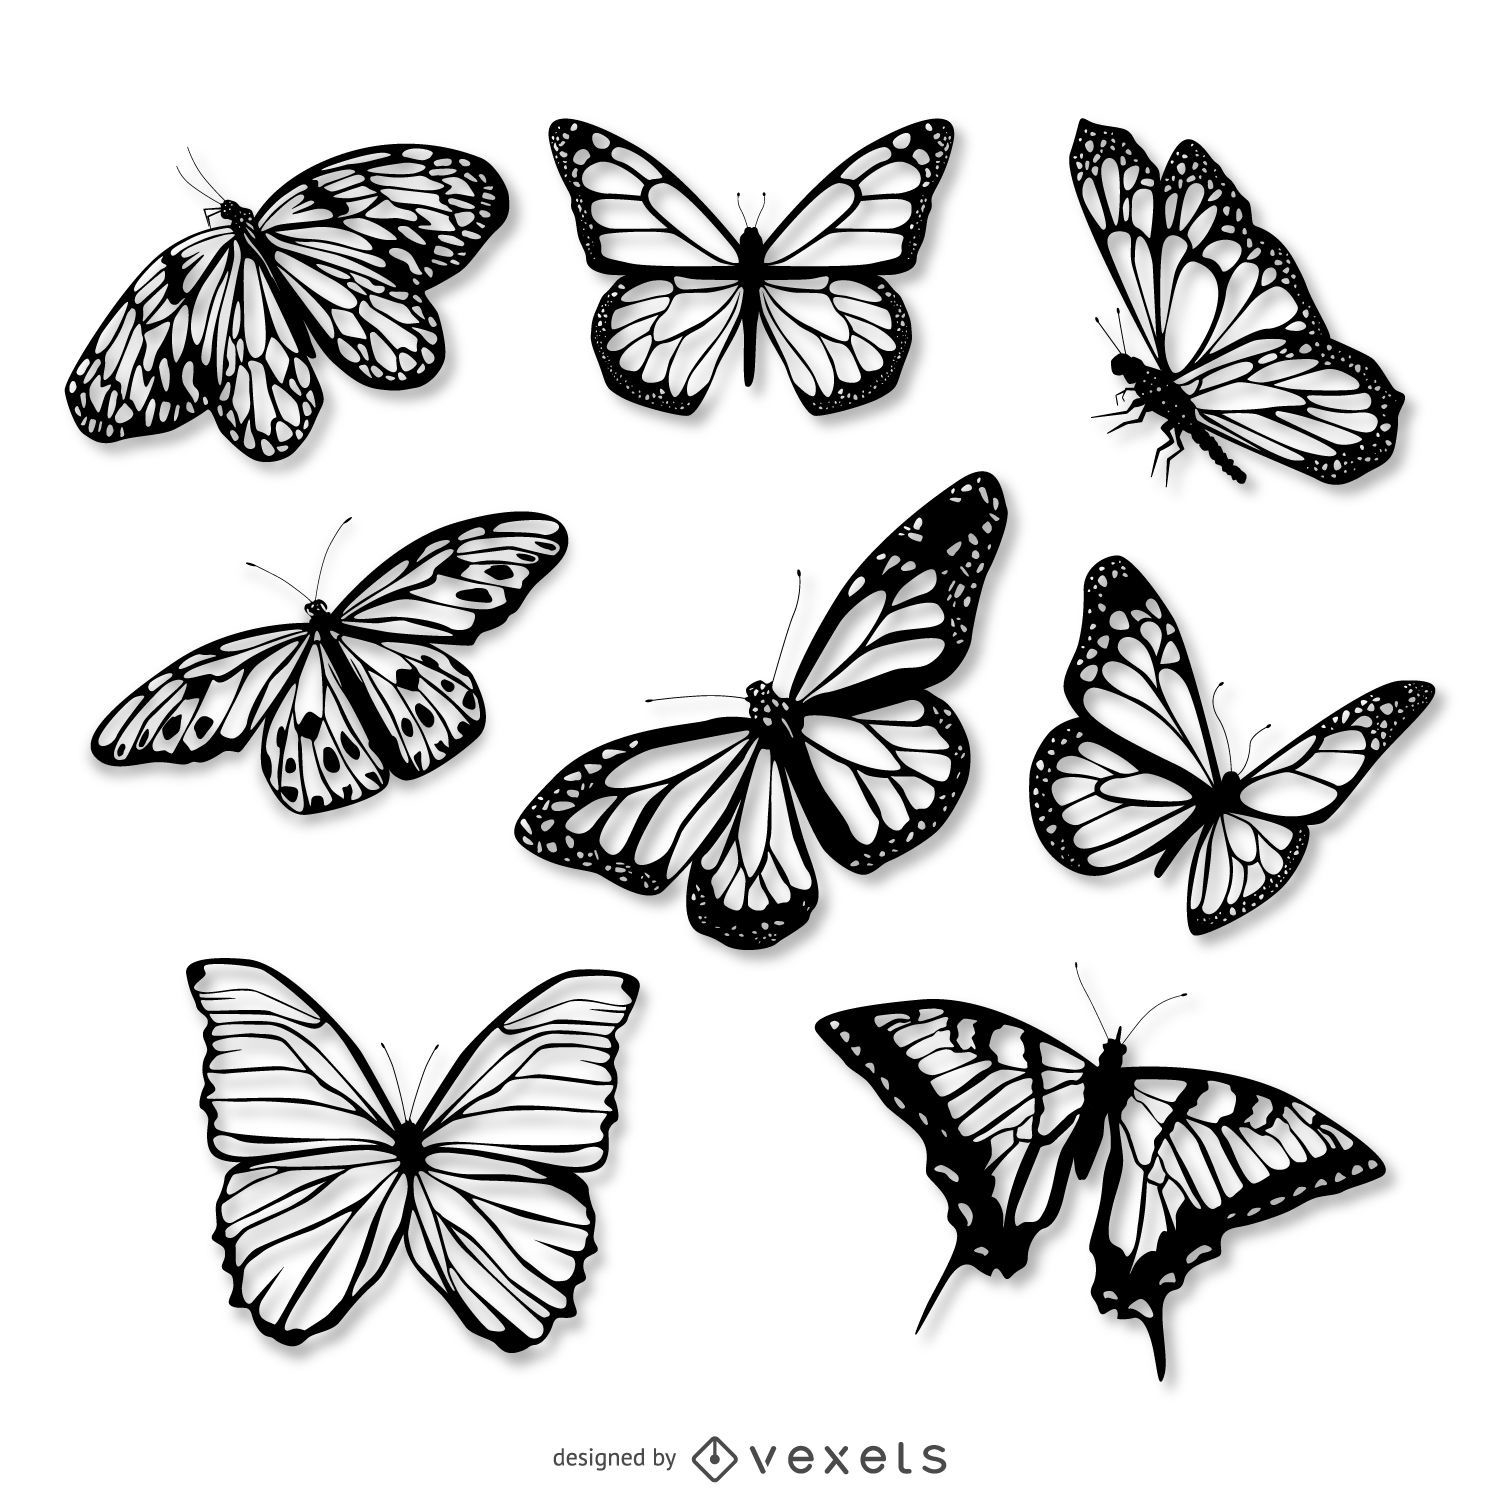 Download Realistic Butterfly Illustration Set - Vector Download